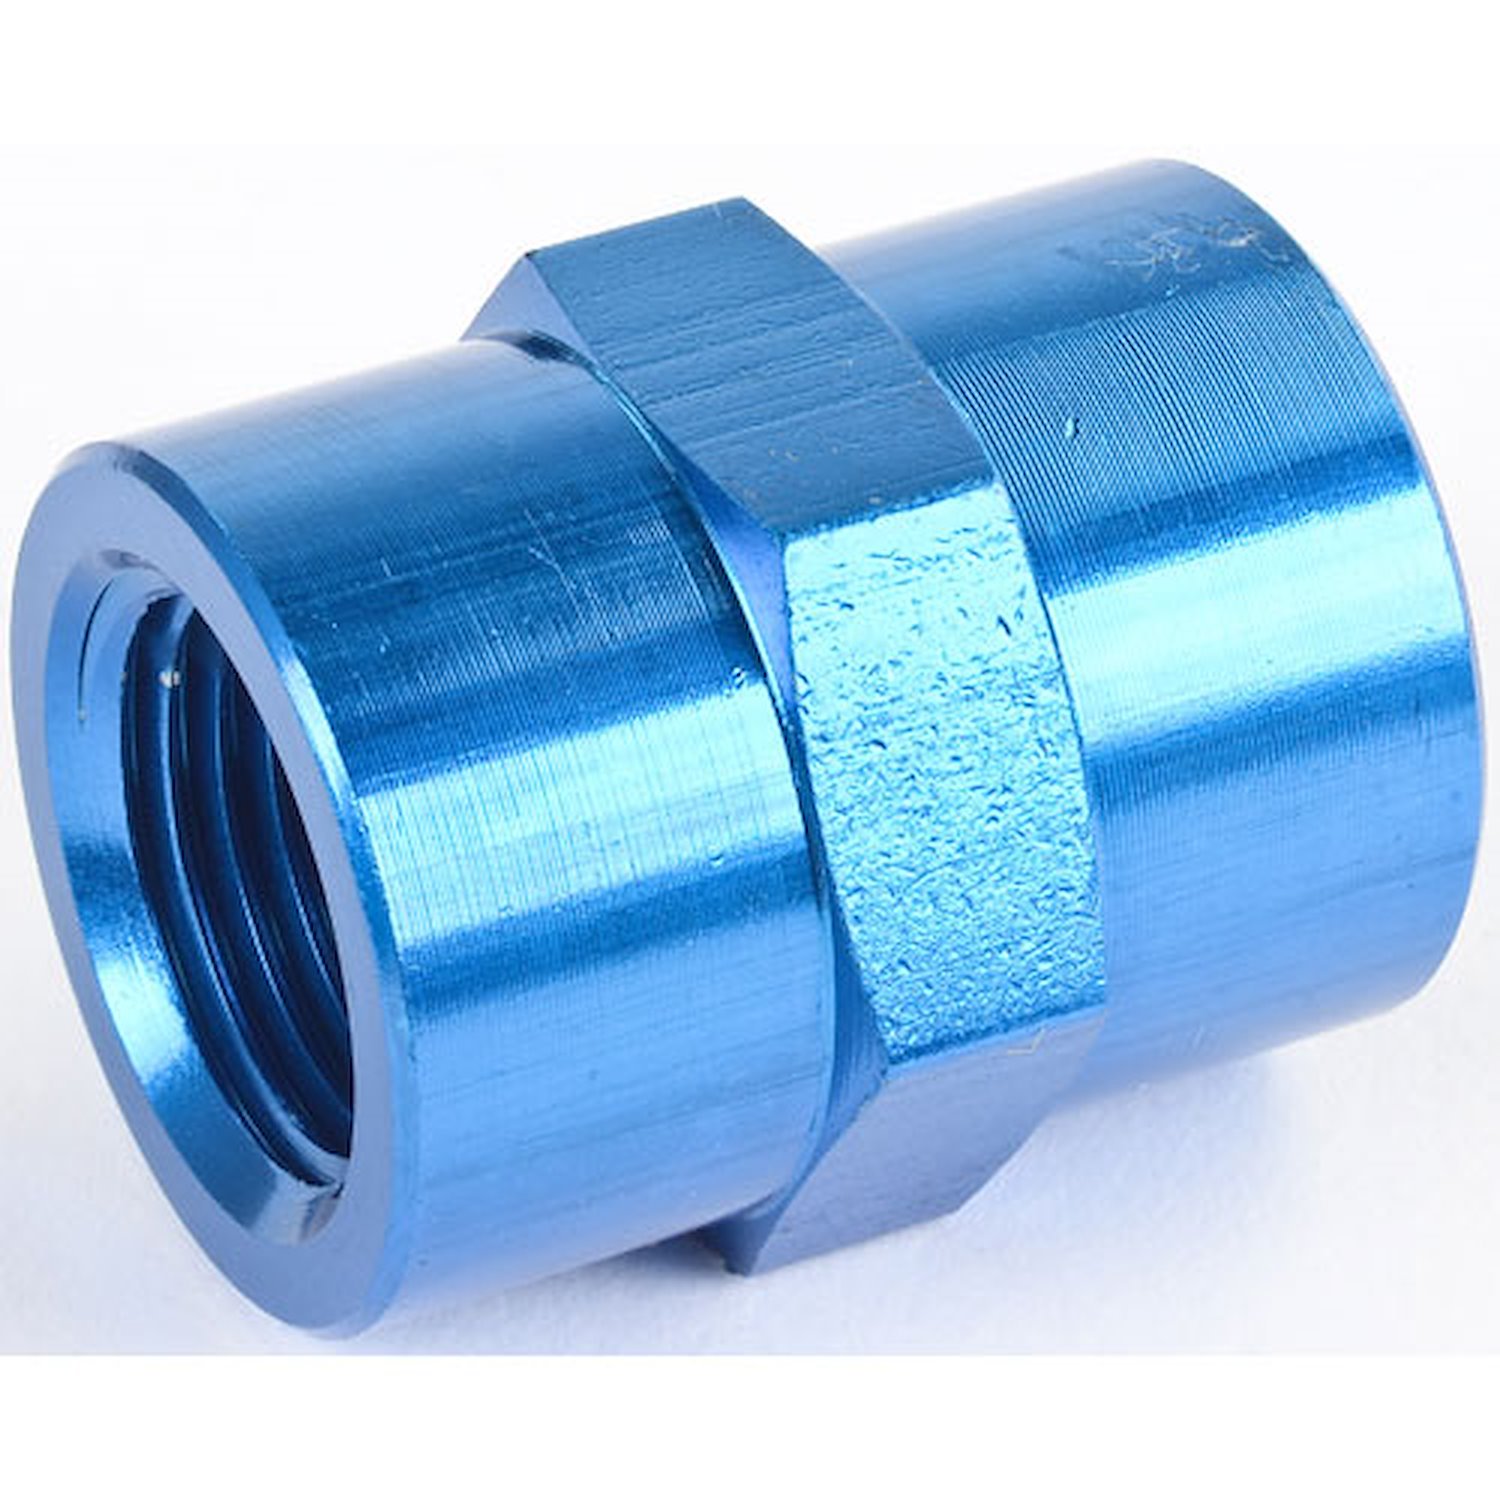 NPT to NPT Union Fitting [3/8 in. NPT Female to 3/8 in. NPT Female, Blue]